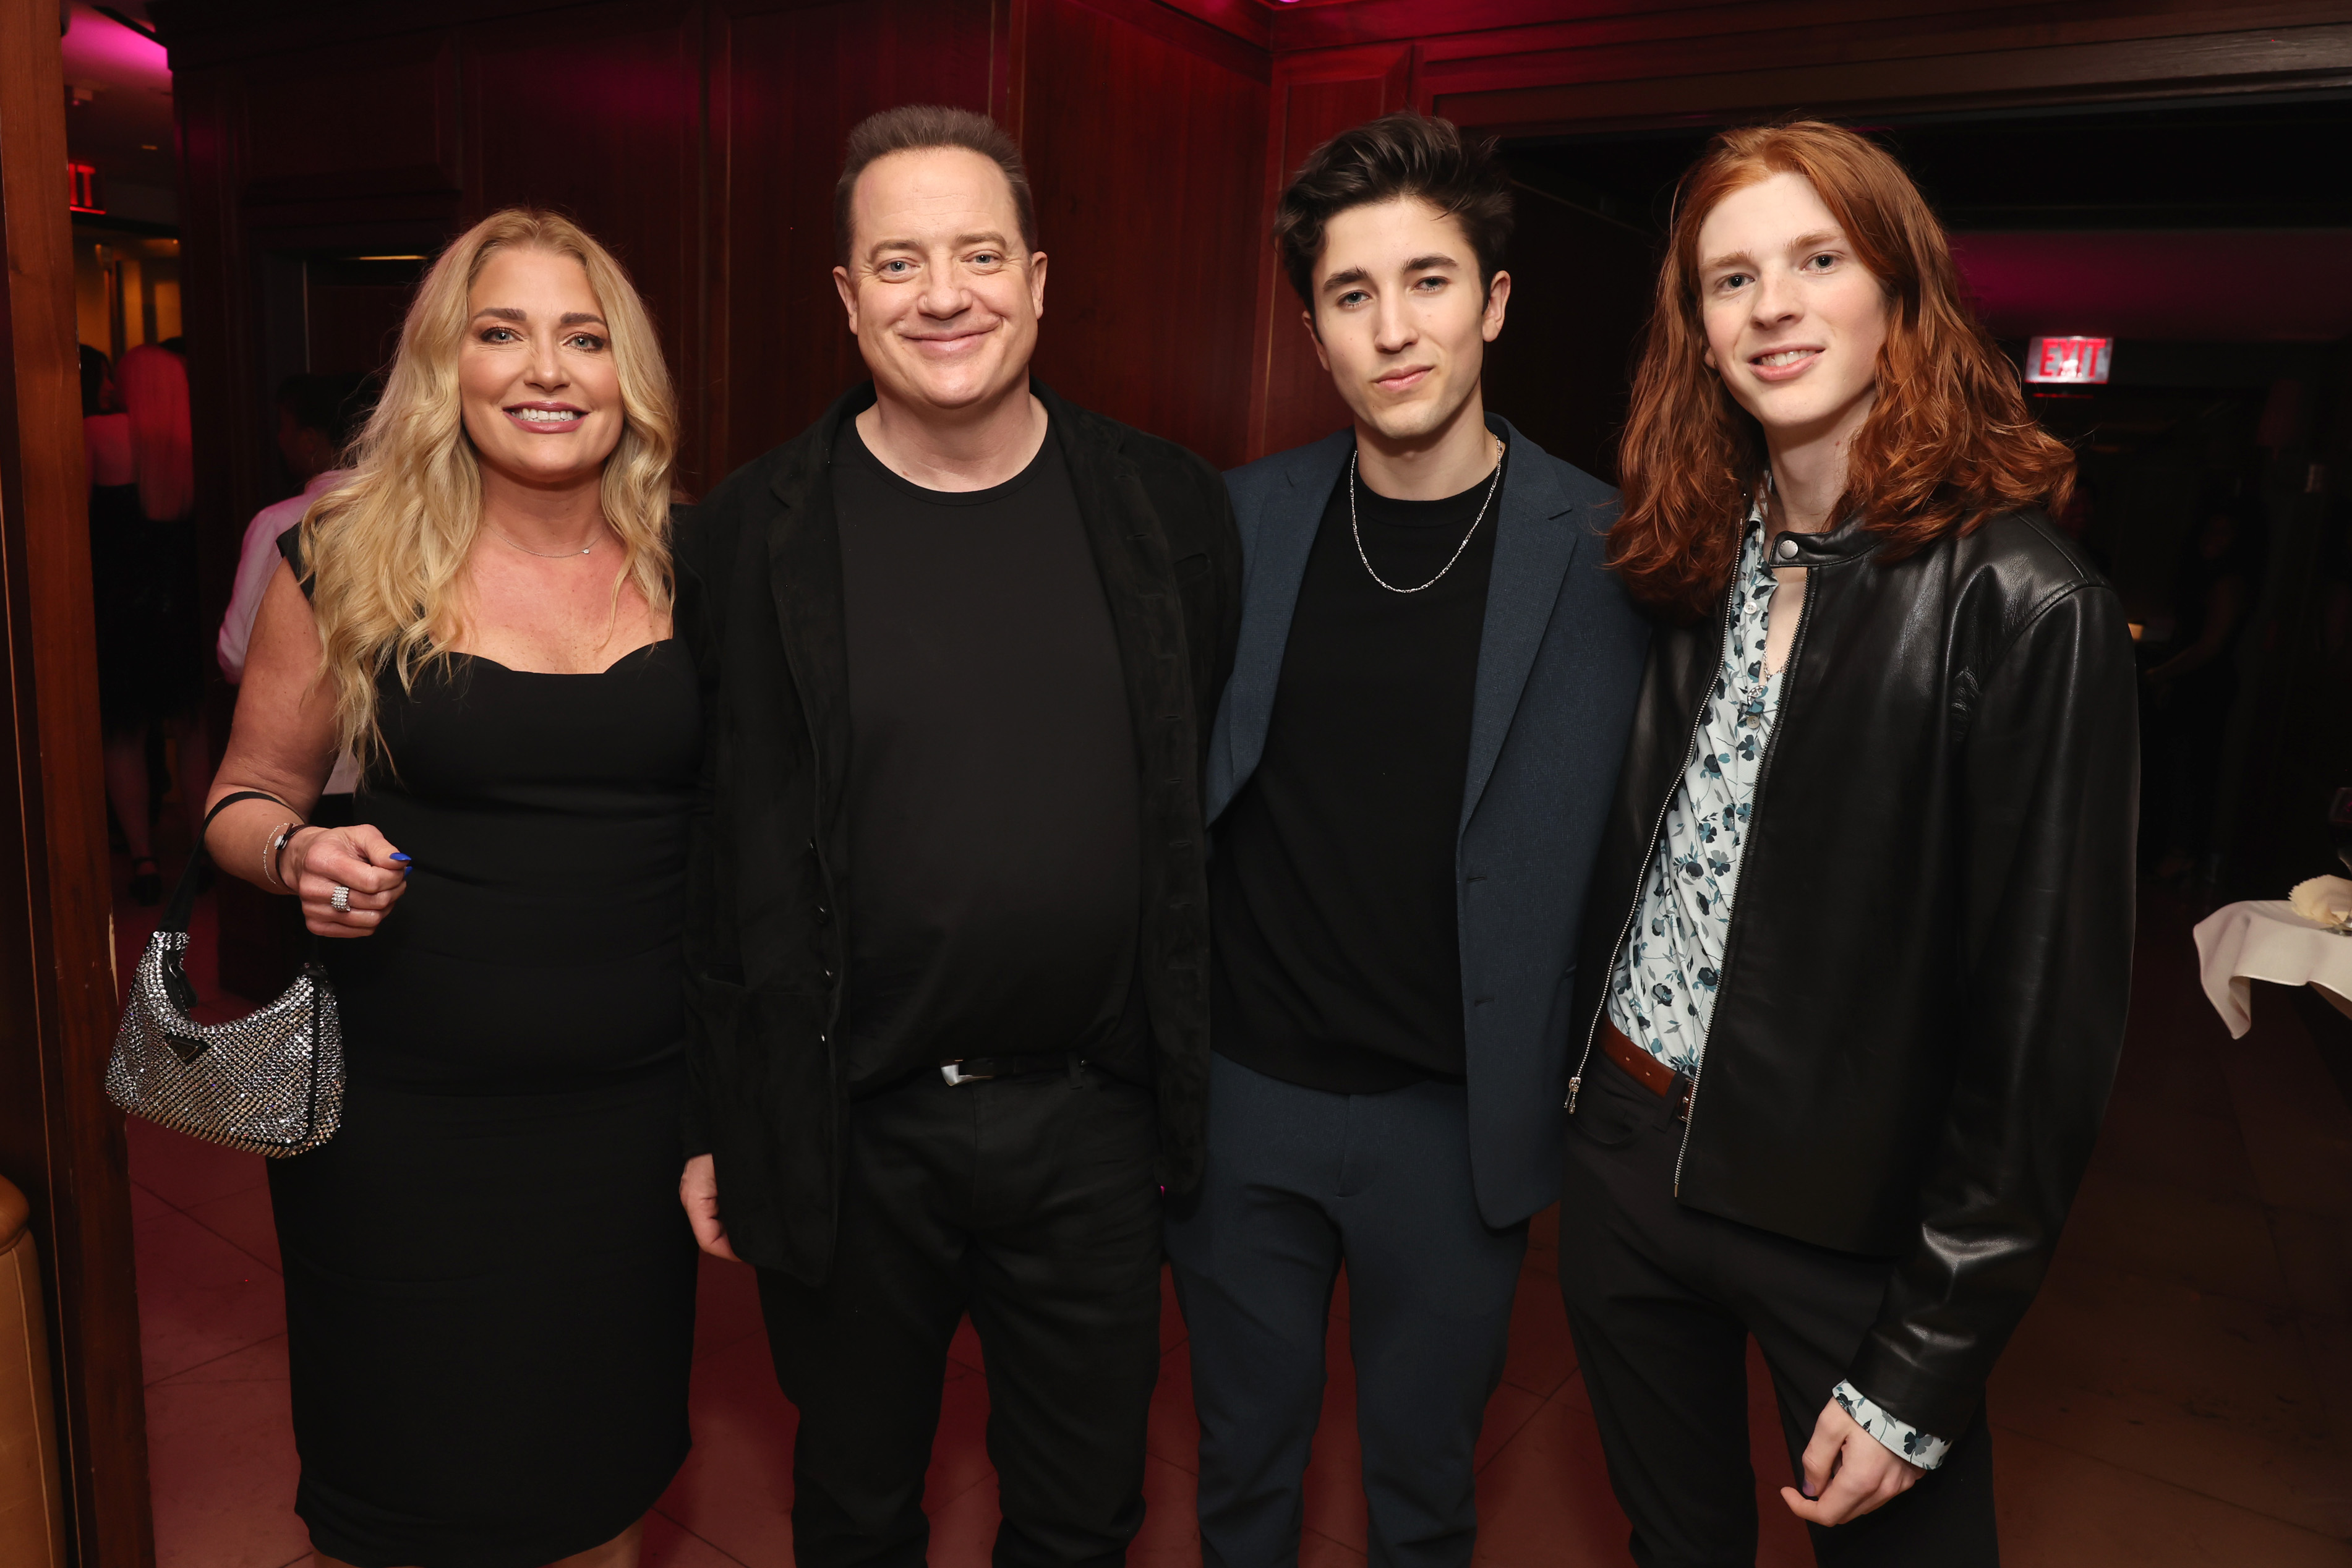 Afton Smith, Brendan Fraser, Holden Fletcher Fraser, and Leland Francis Fraser at the CAA Pre-Oscar Party on March 10, 2023 in Los Angeles, California. | Source: Getty Images